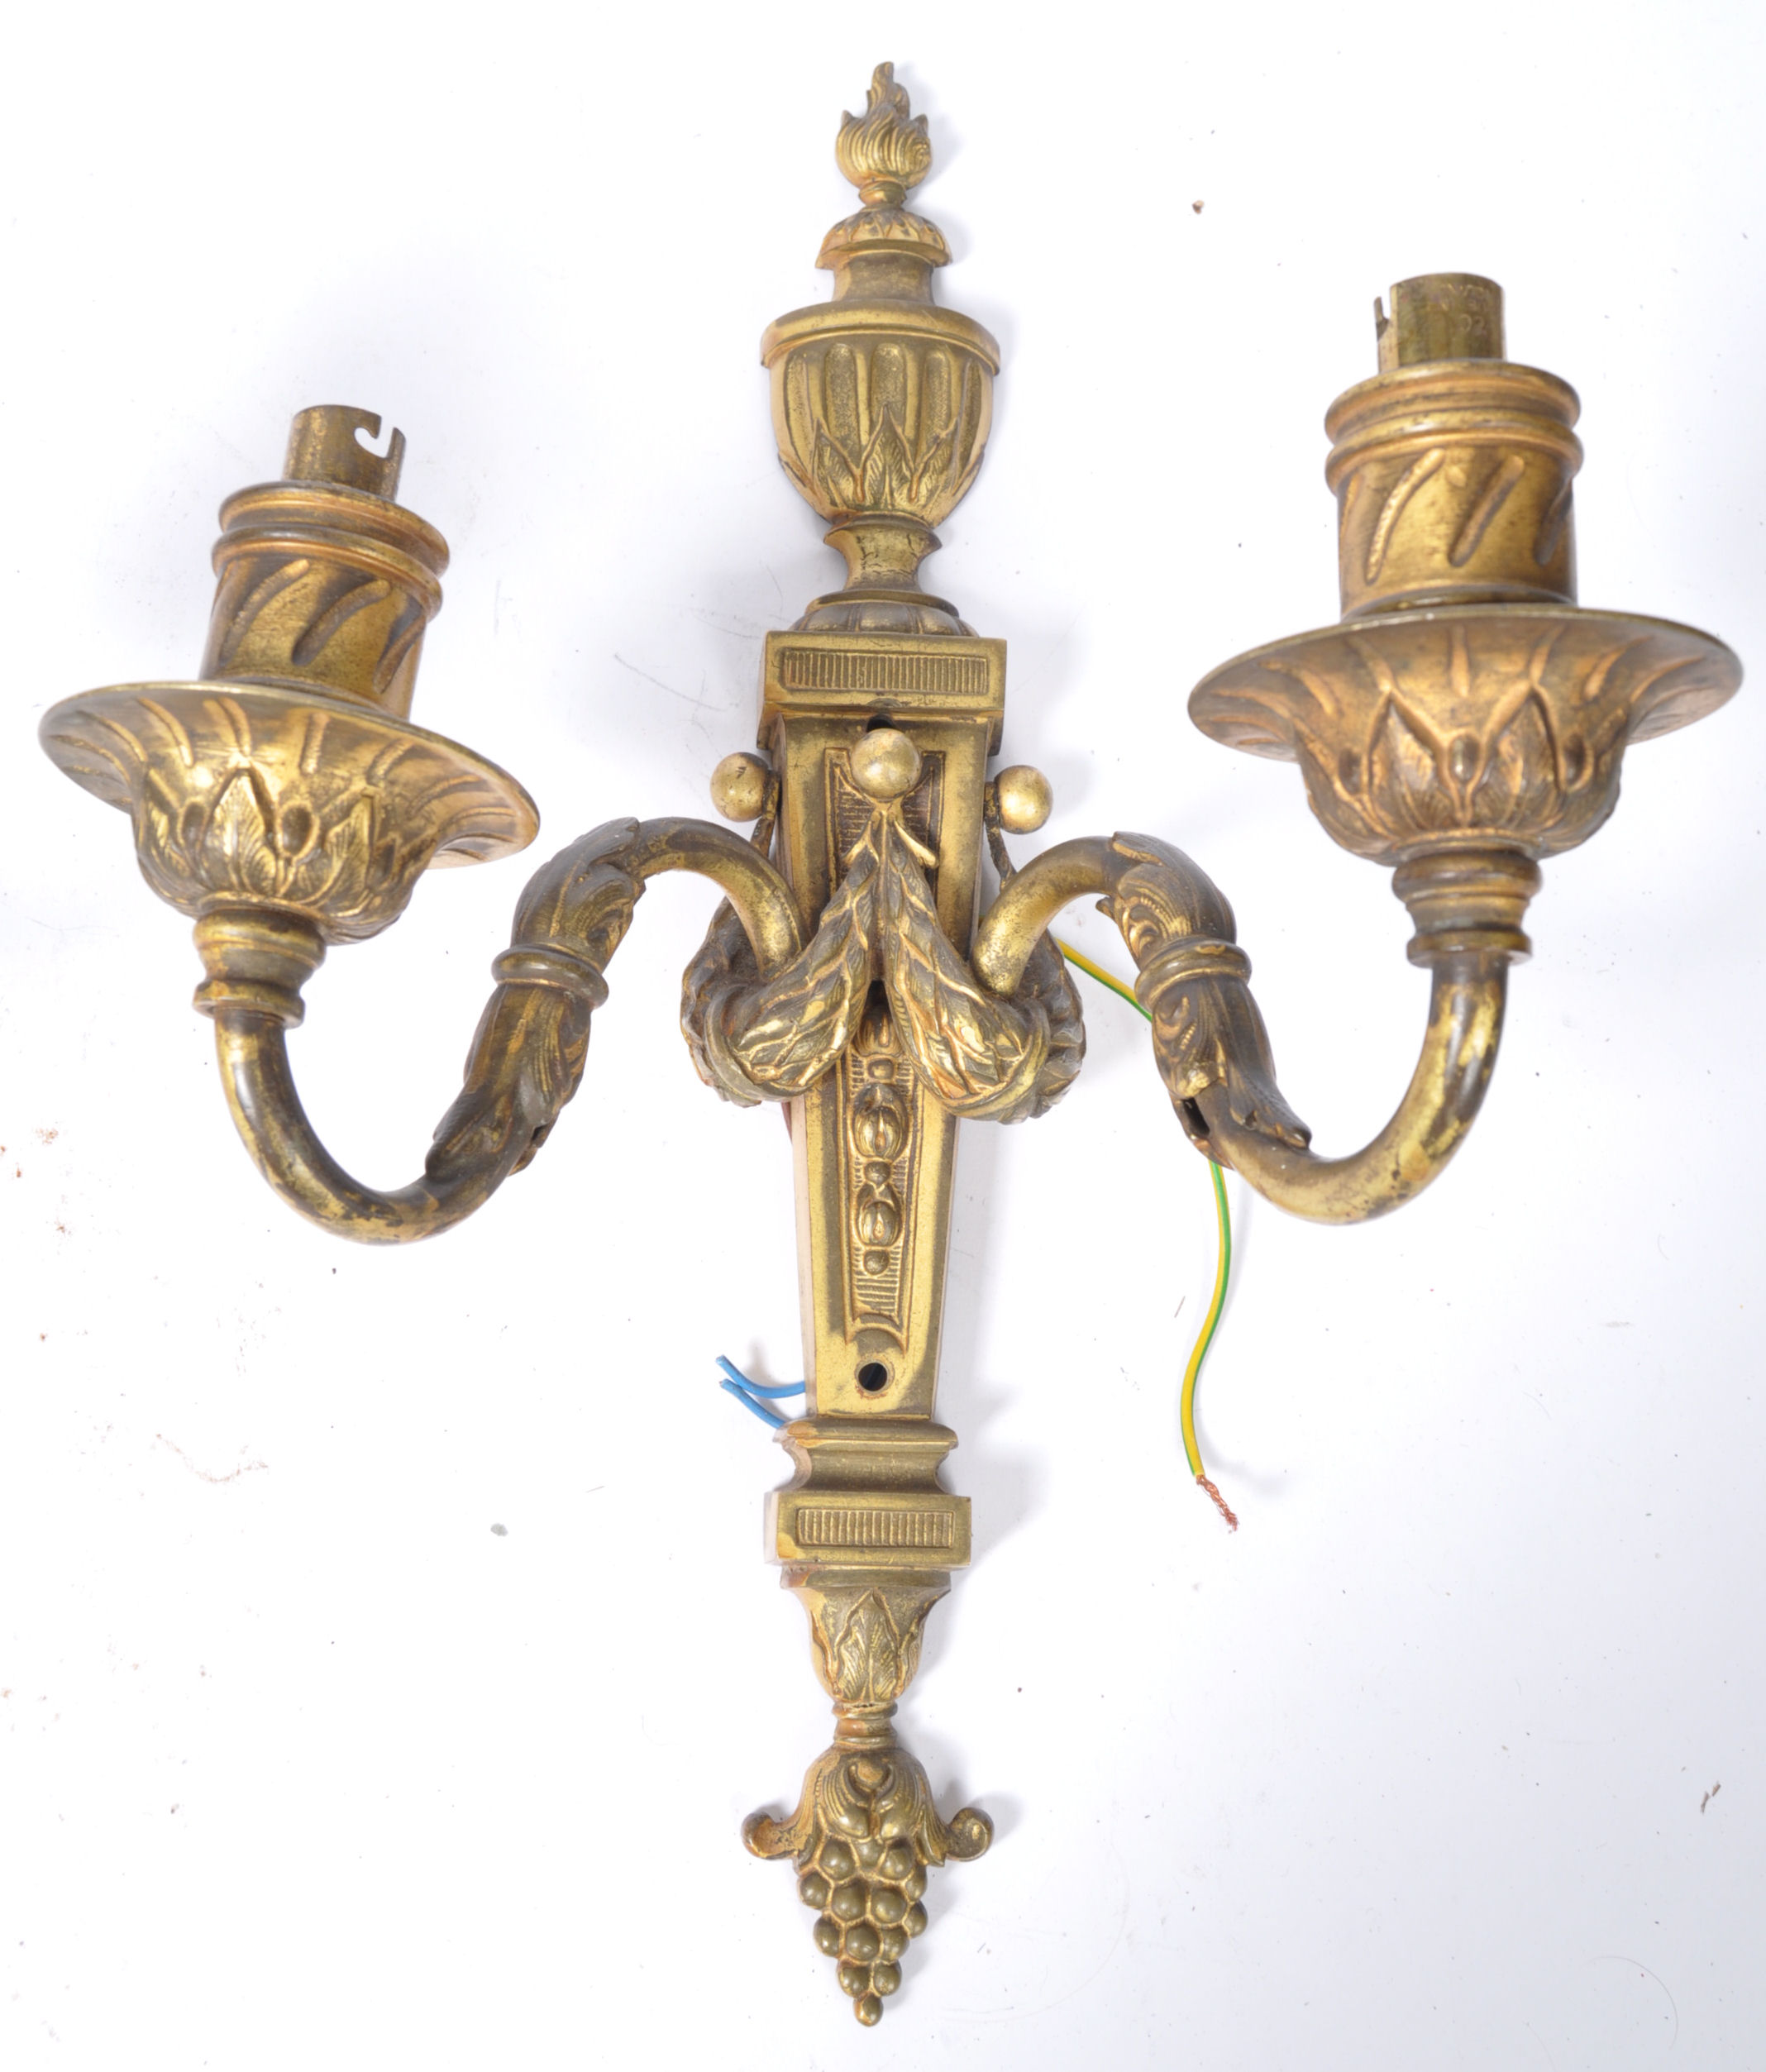 PAIR OF EDWARDIAN GILT BRONZE WALL LIGHTX IN THE A - Image 2 of 5